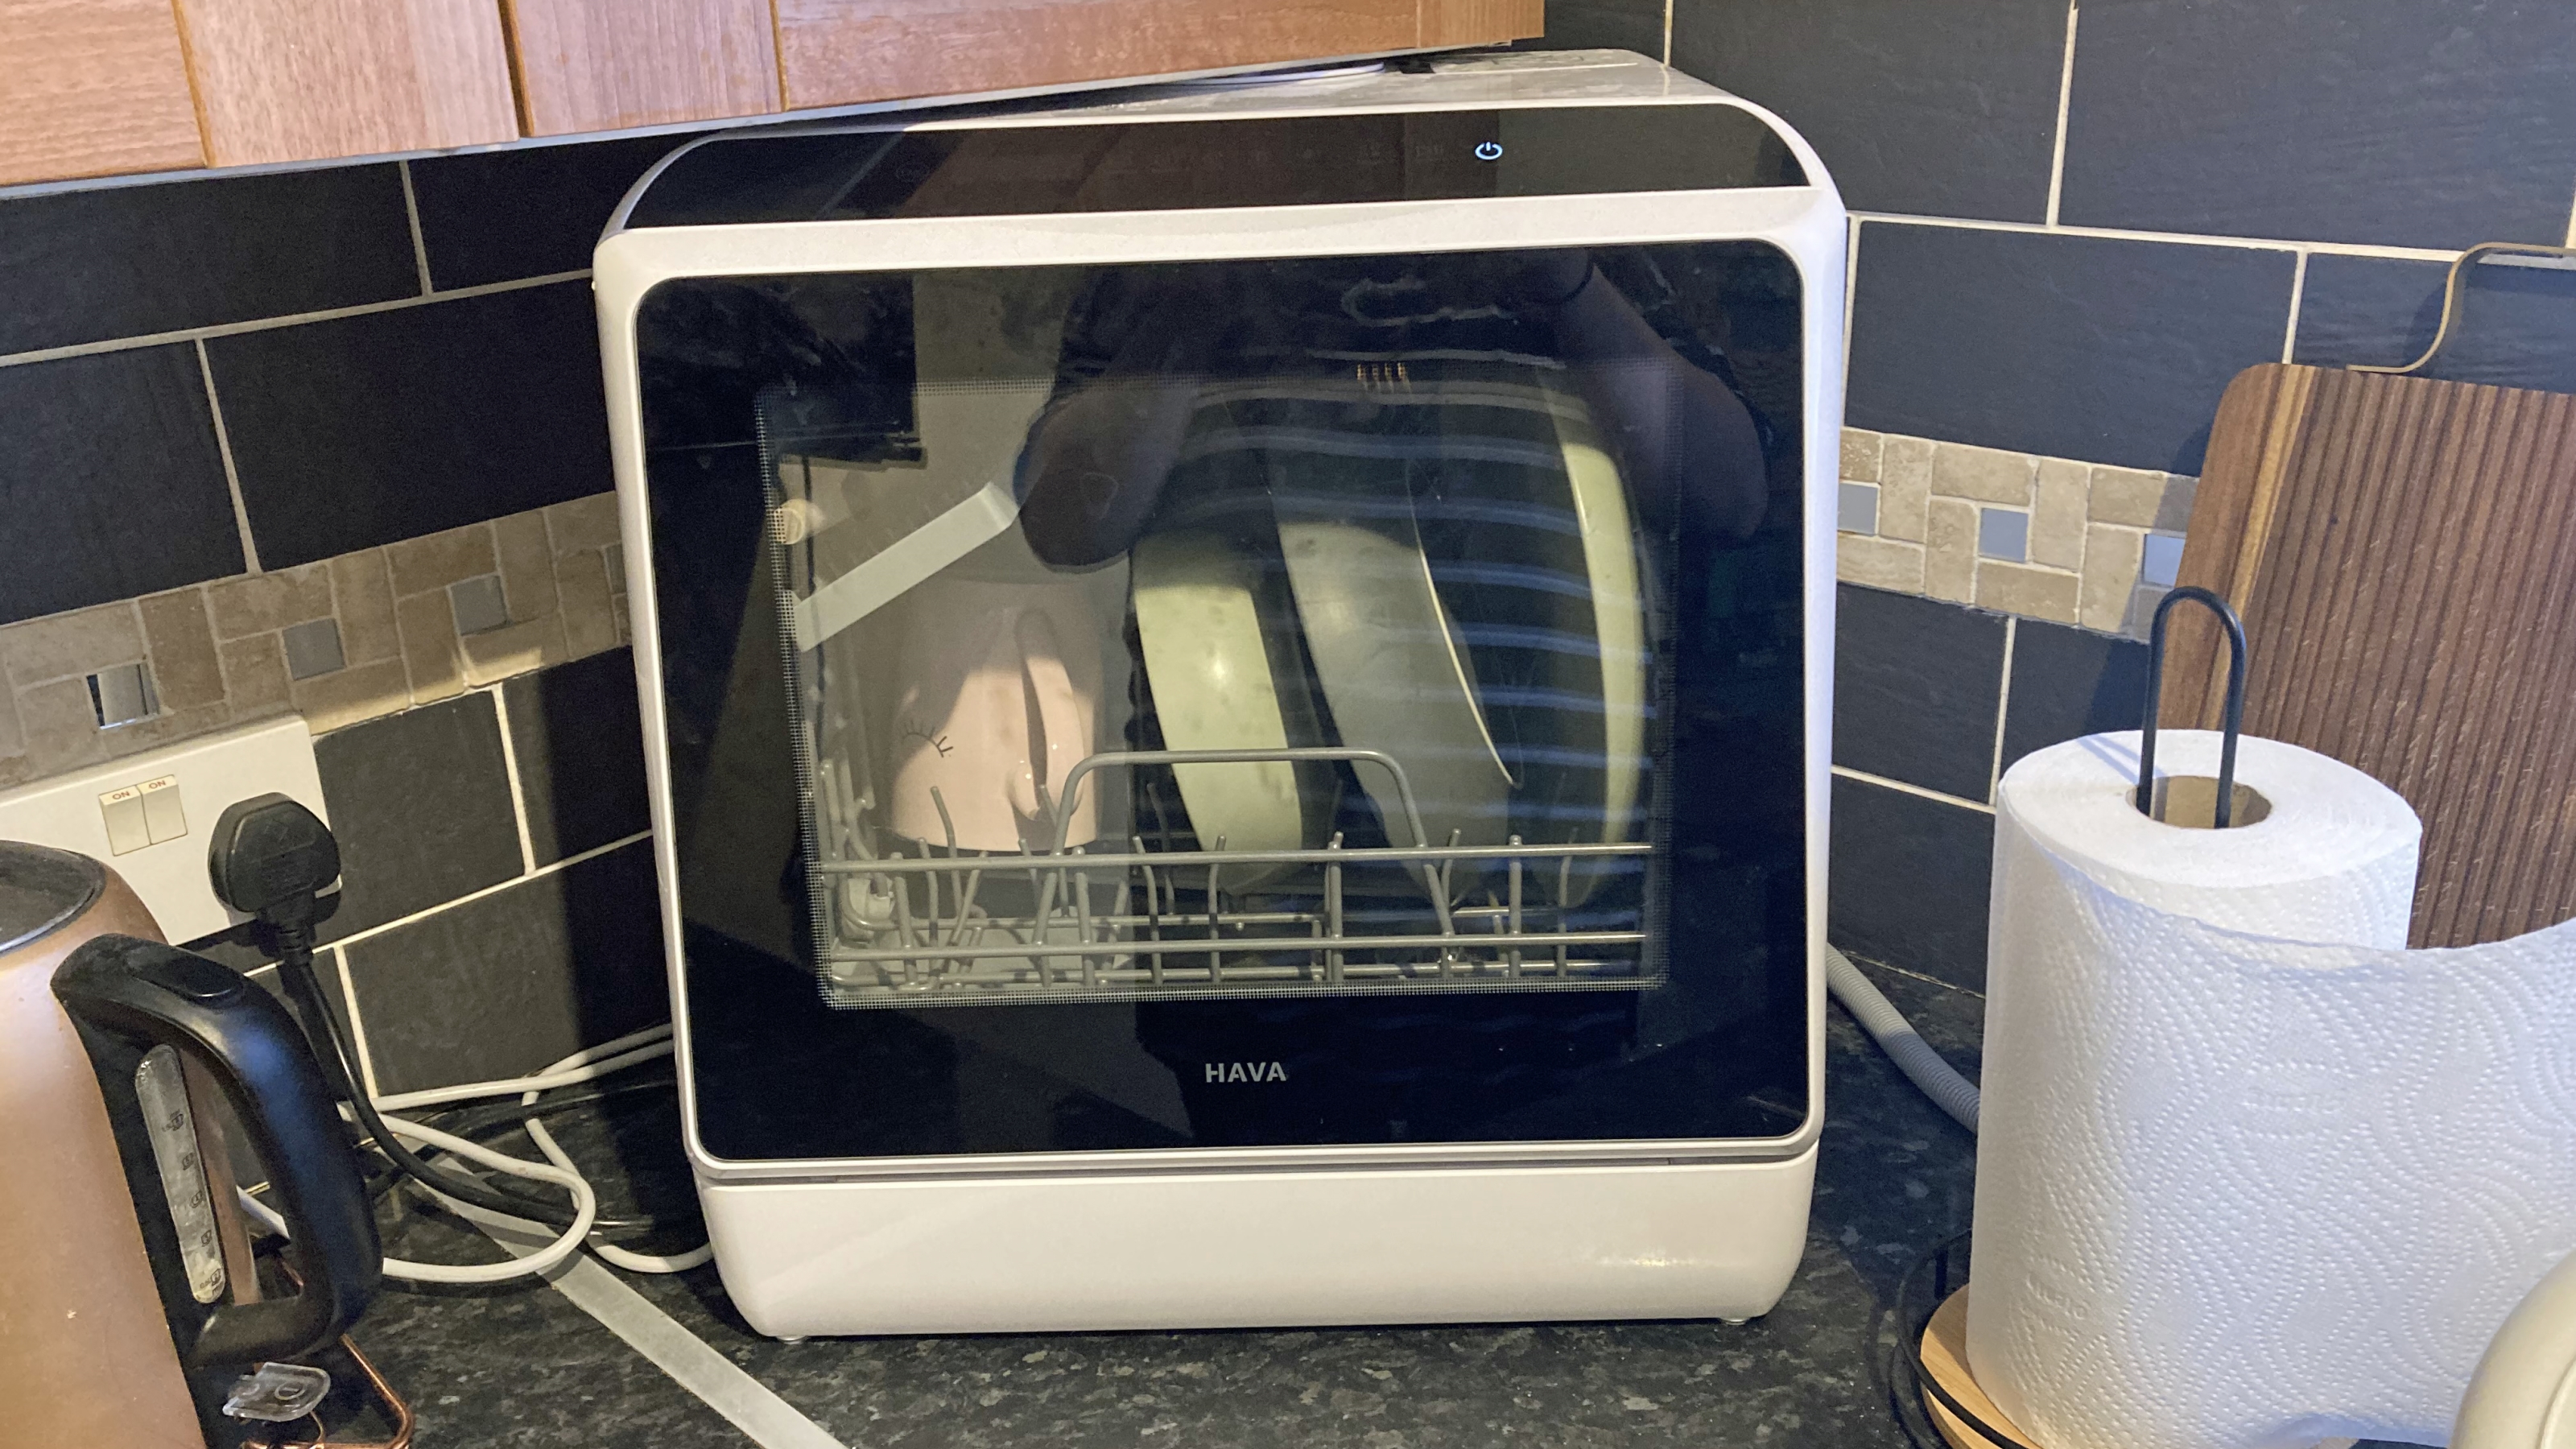 HAVA R01 compact countertop dishwasher review - The Gadgeteer